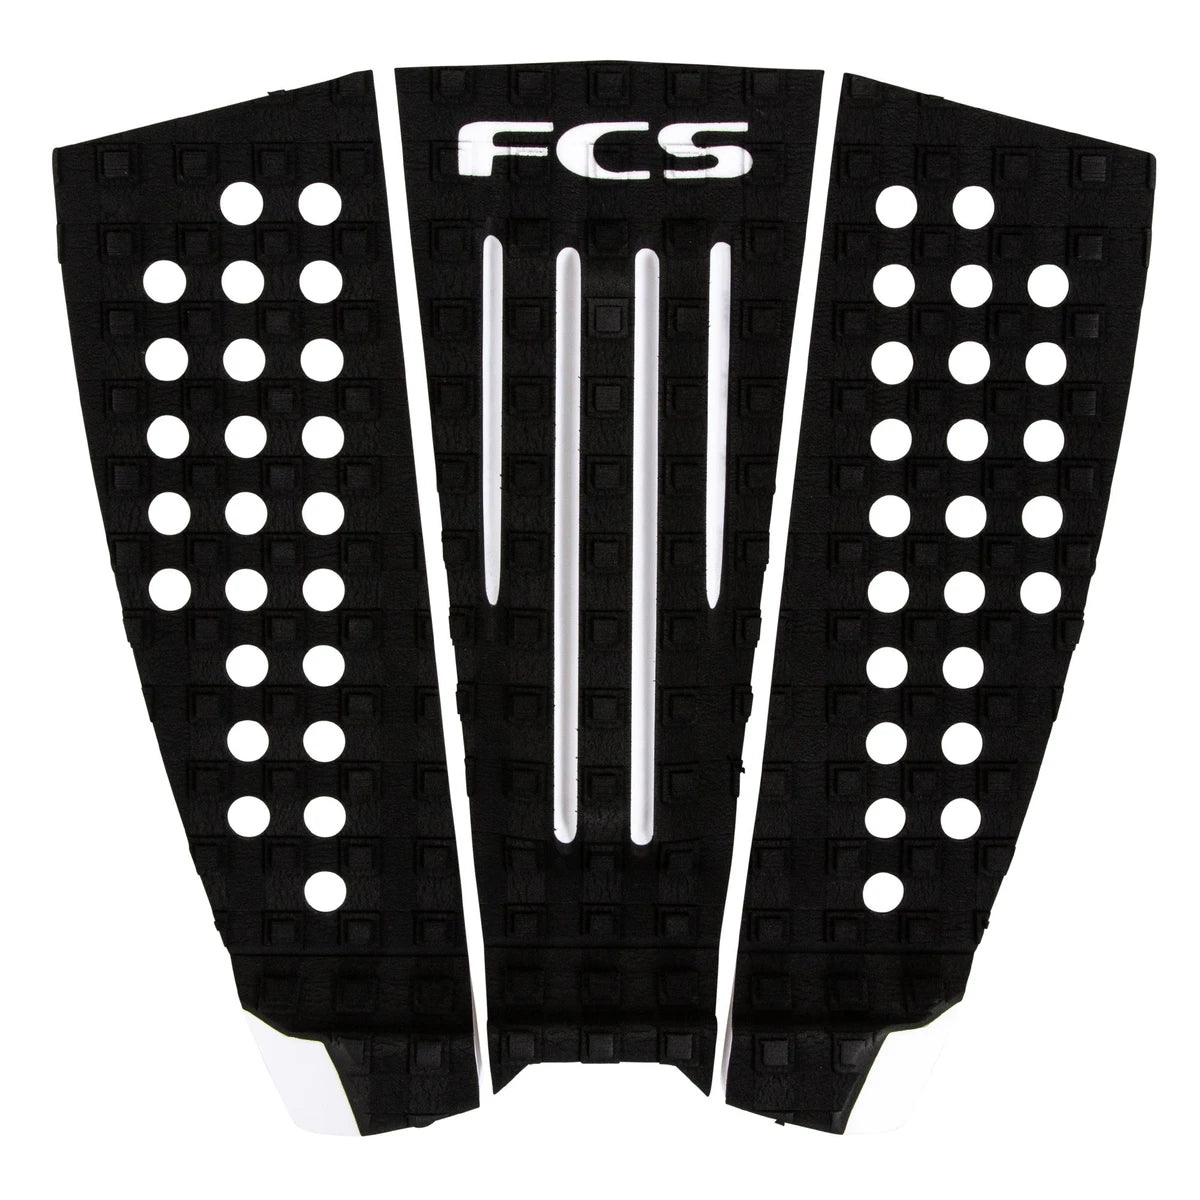 FCS Julian Wilson Surfboard Traction Pad Traction Pad Black White